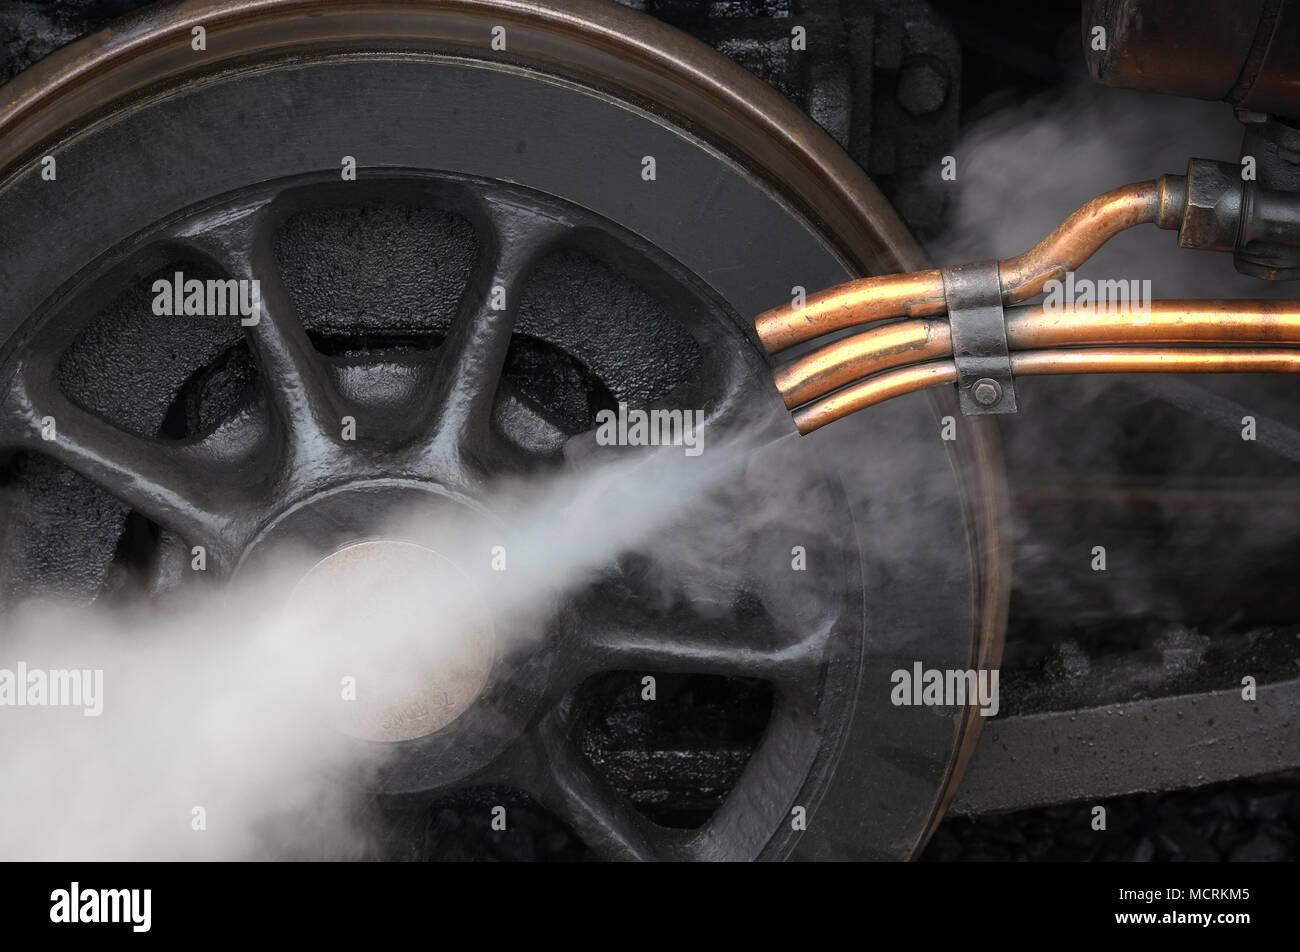 steam coming out of copper pipes on old locomotive engine Stock Photo